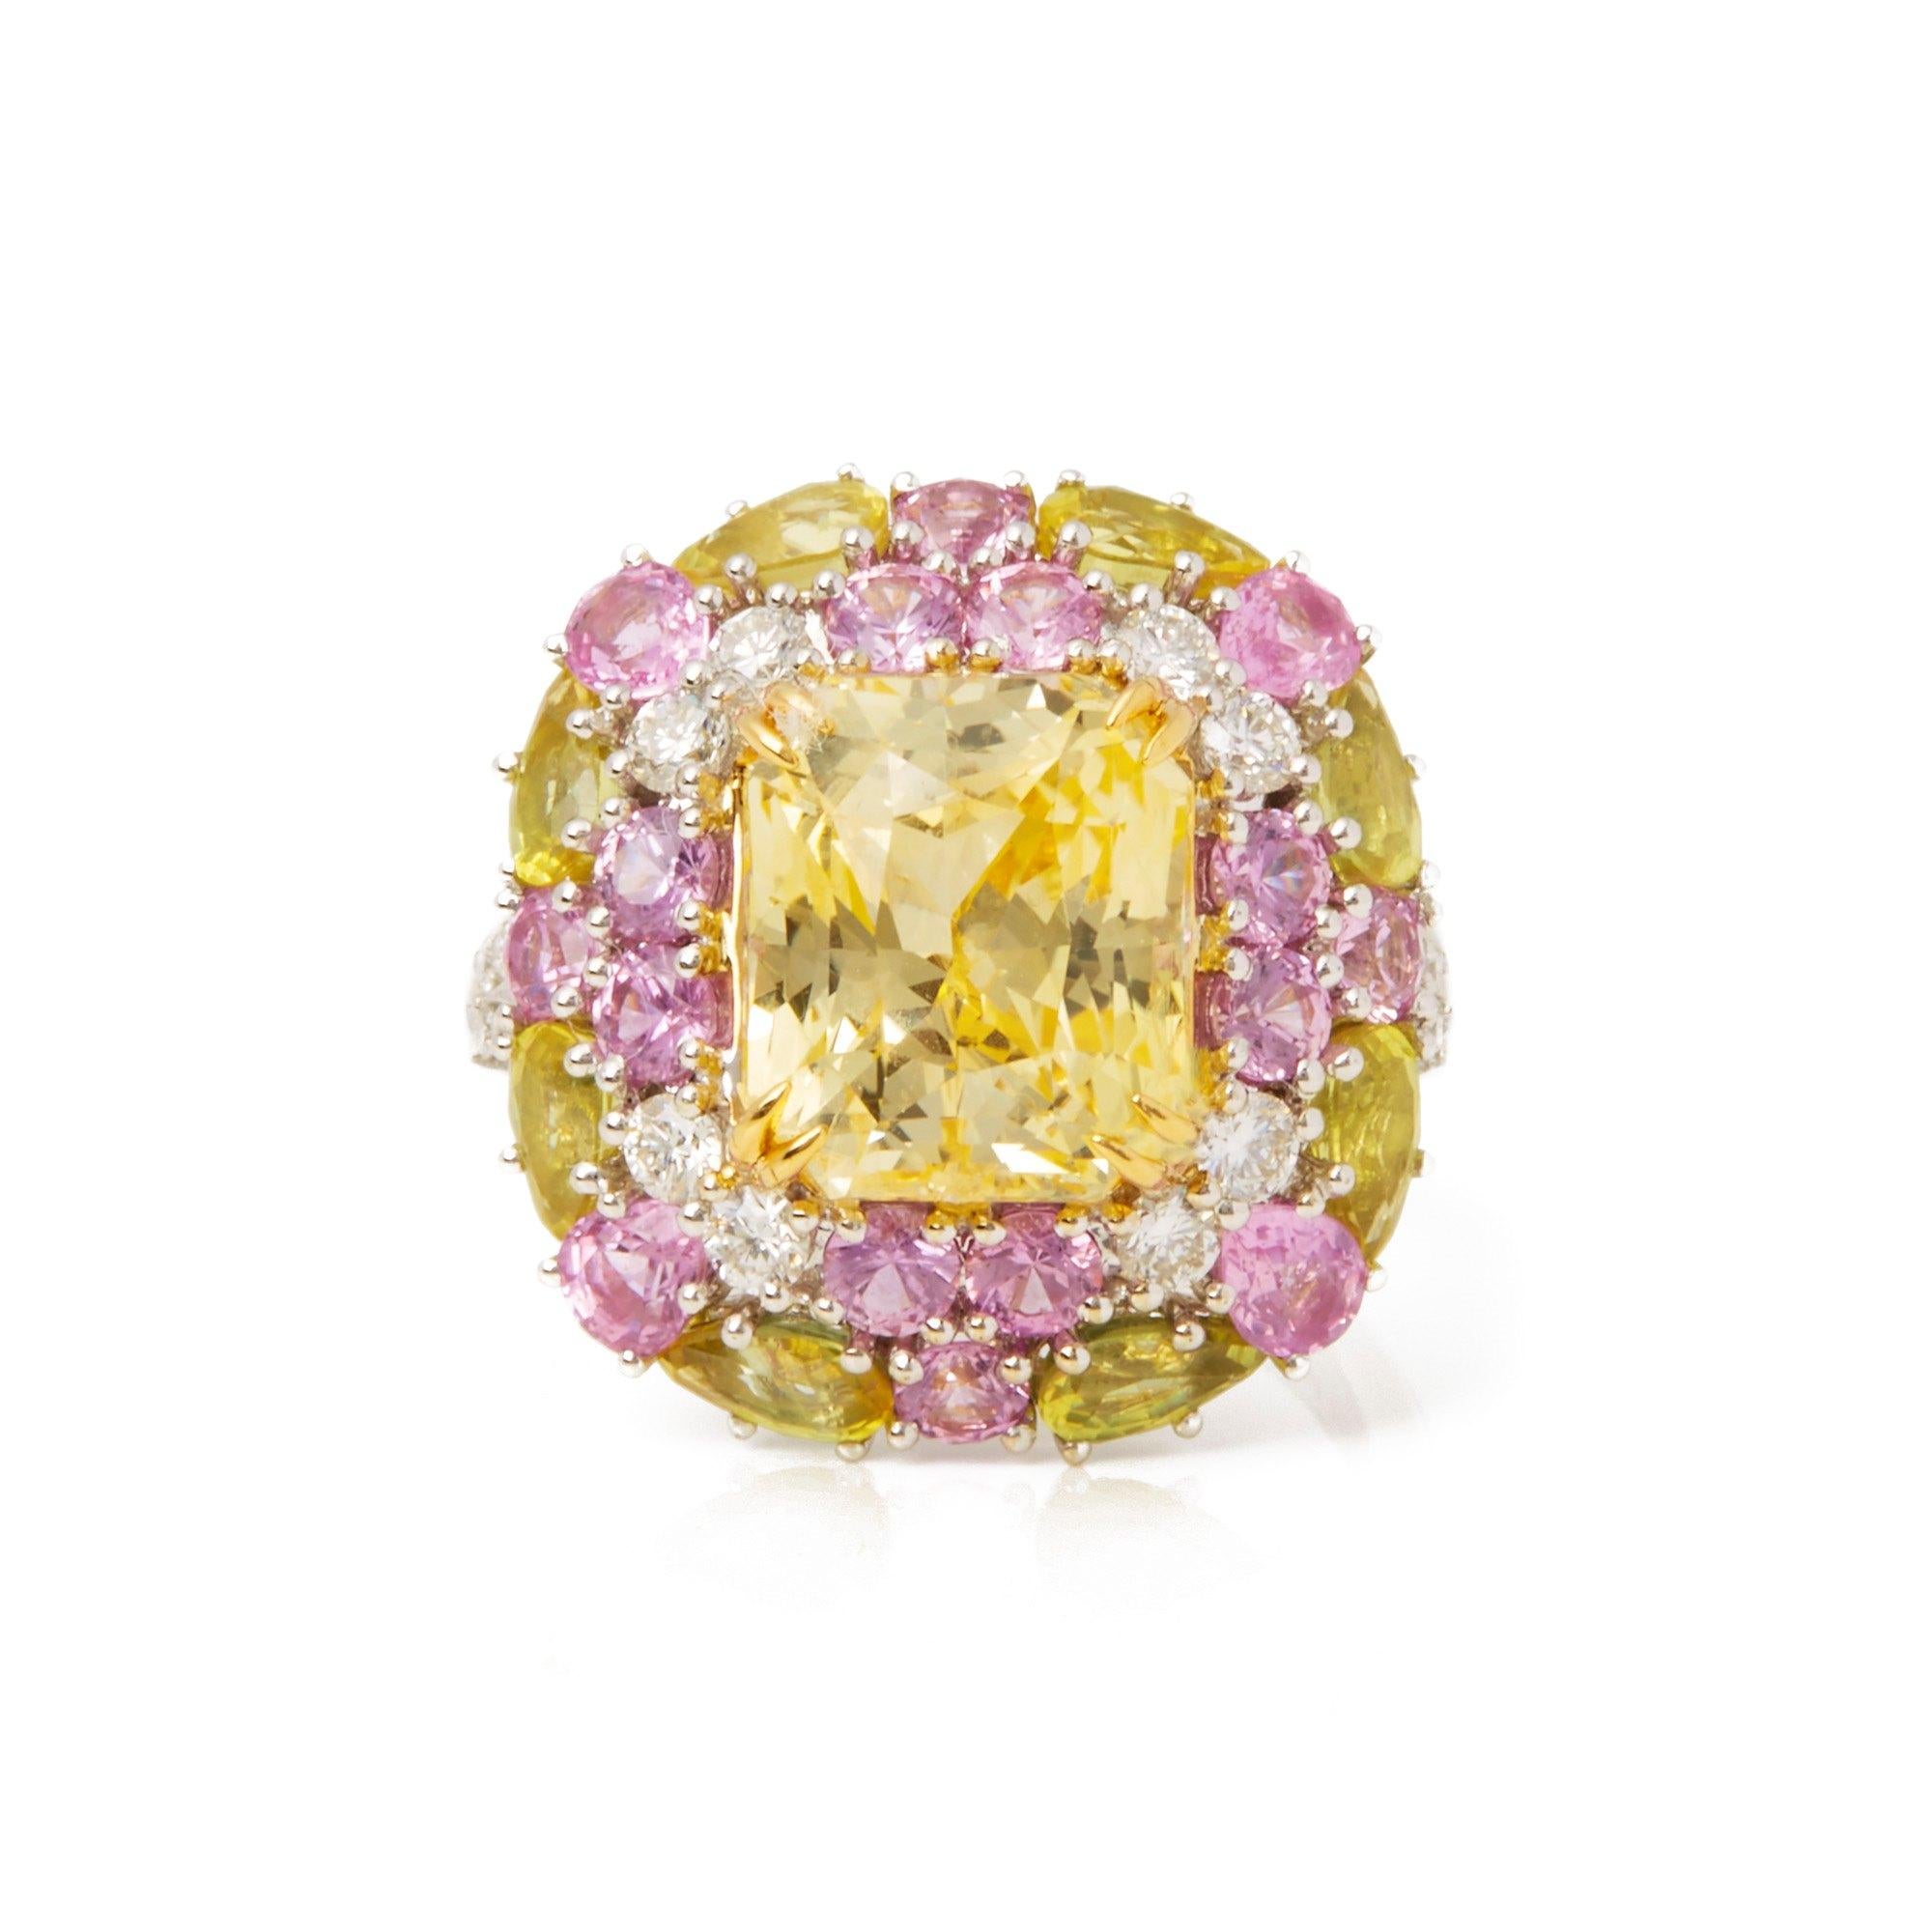 This ring designed by David Jerome is from his private collection and features one untreated octagonal scissor cut yellow Sapphire sourced in Sri Lanka. Totalling 8.14cts set with round brilliant cut Diamonds, yellow and pink Sapphires totalling